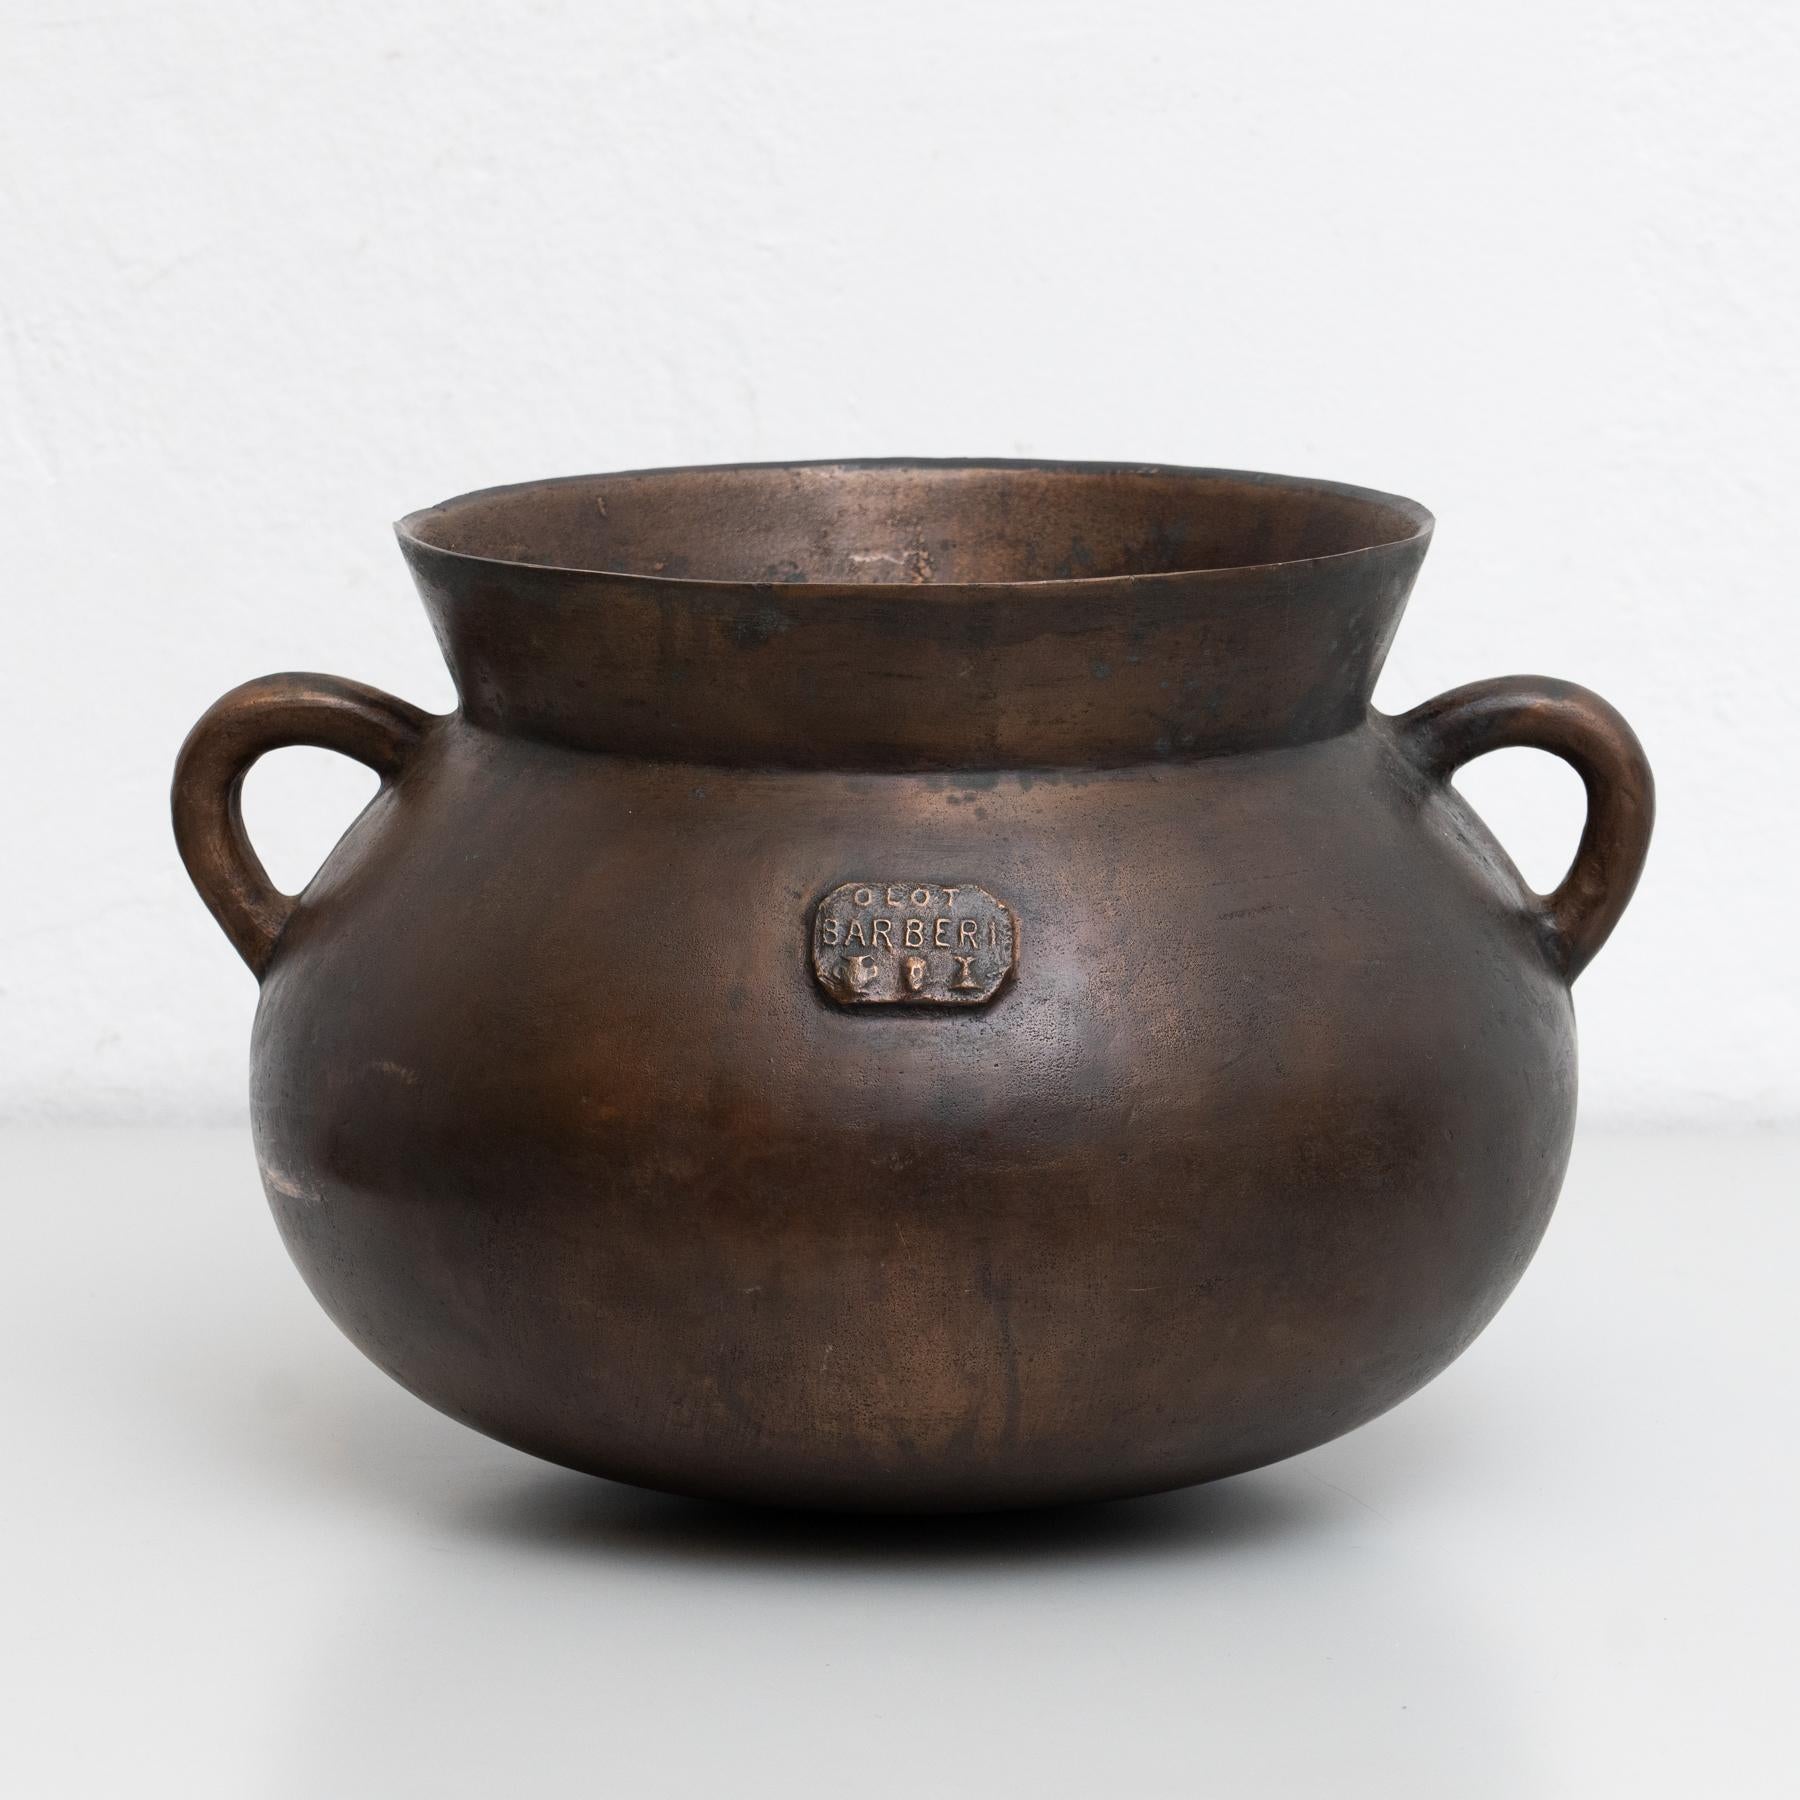 Vintage bronze pot. 

Signed.

By Barberí foundry in Olot, Spain circa 1950.

In original condition, with minor wear consistent with age and use, preserving a beautiful patina.

Materials:
Bronze.
 